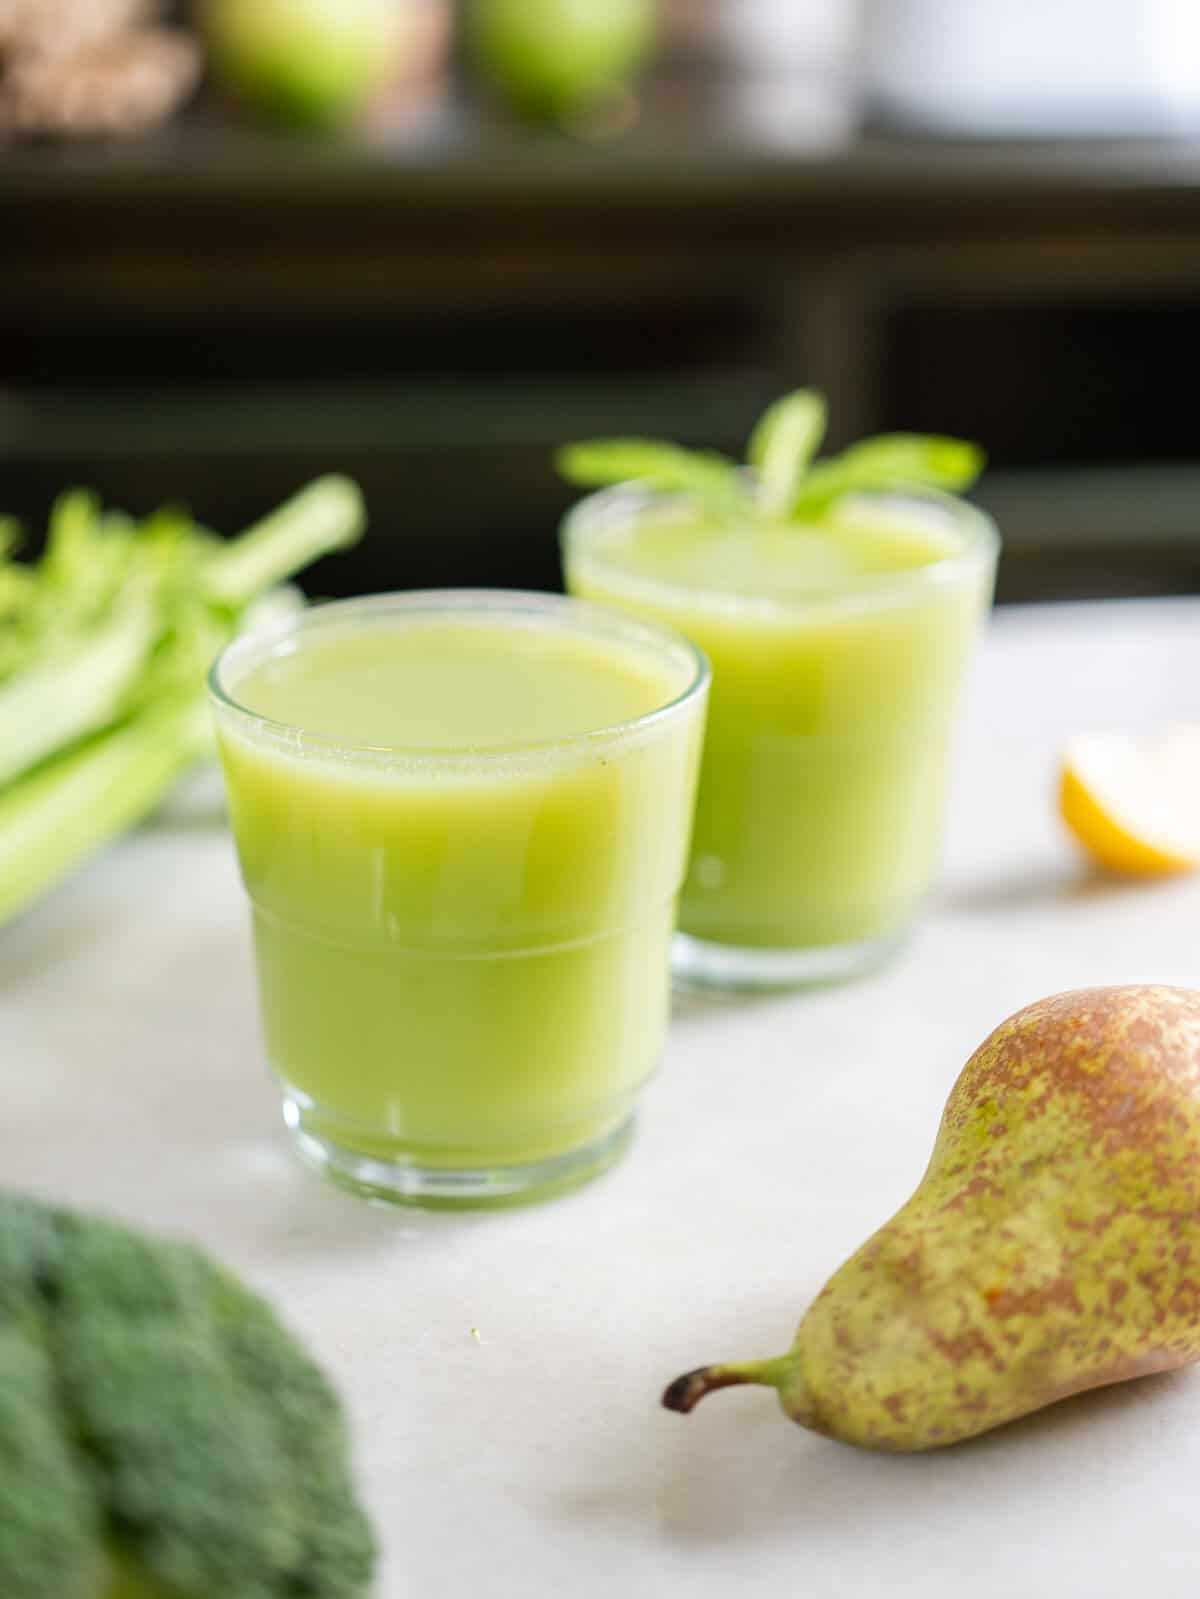 serve your broccoli juice with spearmint leaves.